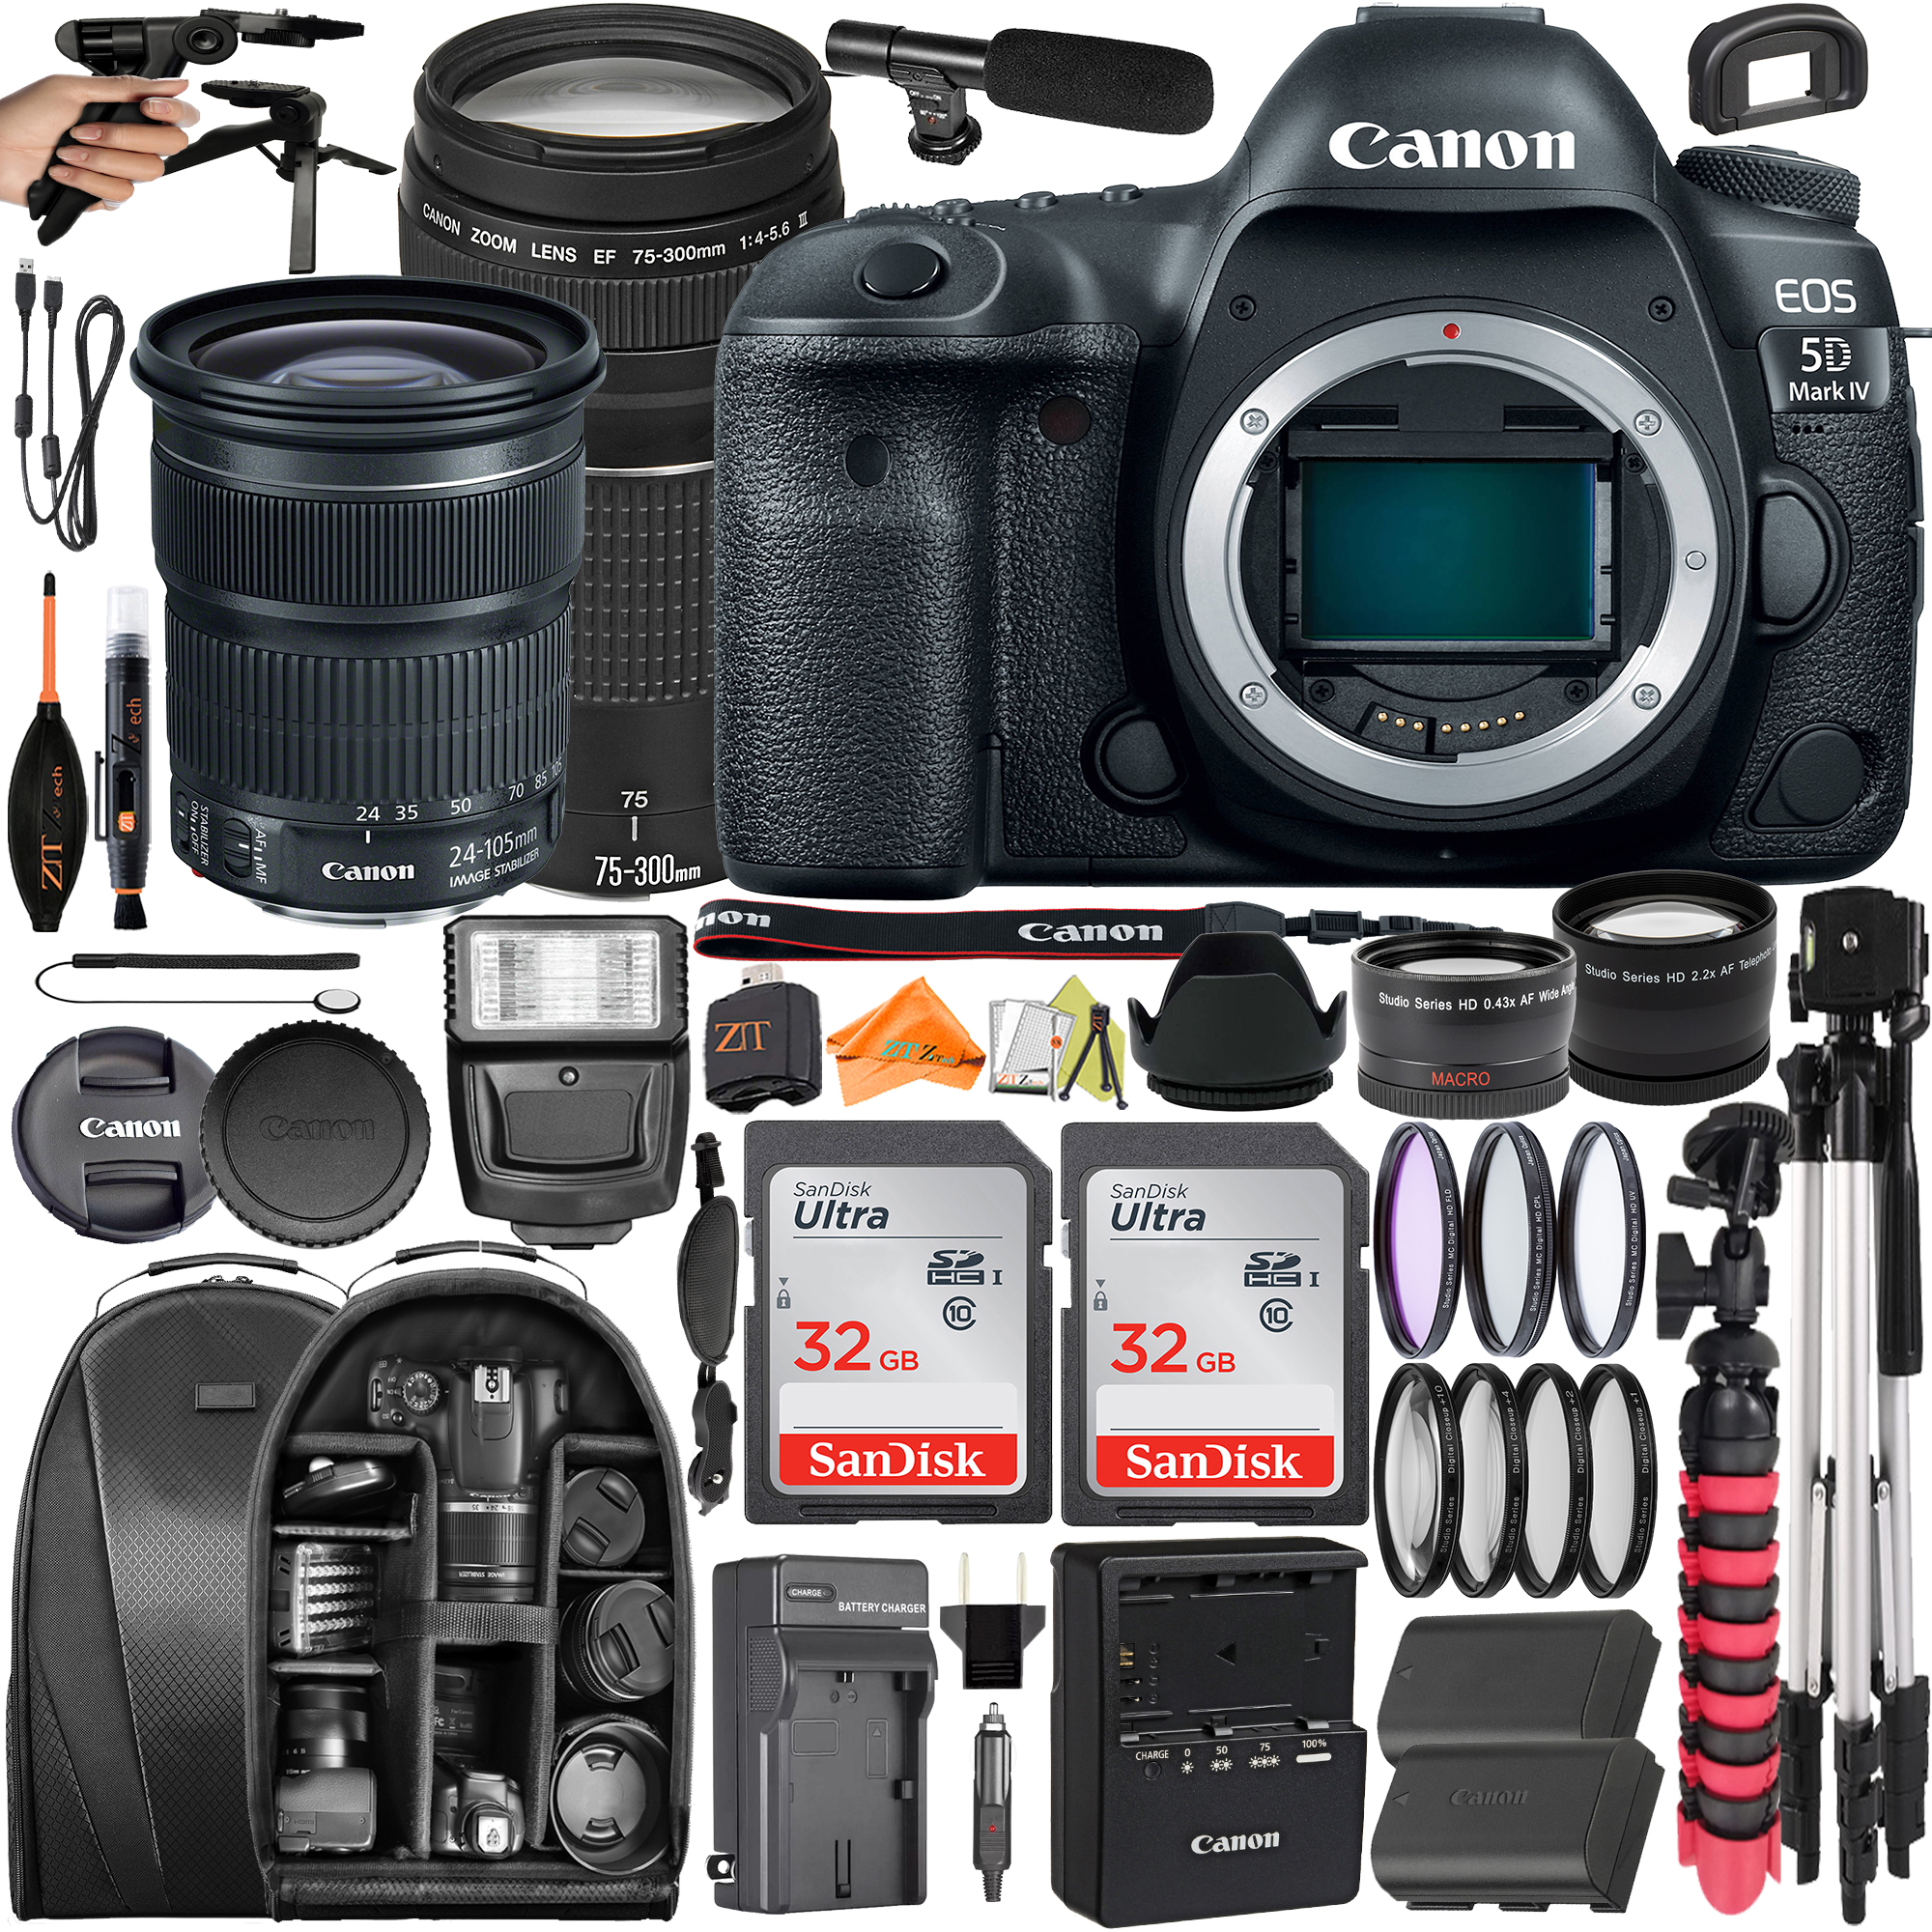 Canon EOS 5D Mark IV DSLR Camera with 24-105mm + 75-300mm Lens + 2 Pack SanDisk 32GB + Backpack + ZeeTech Accessory Bundle